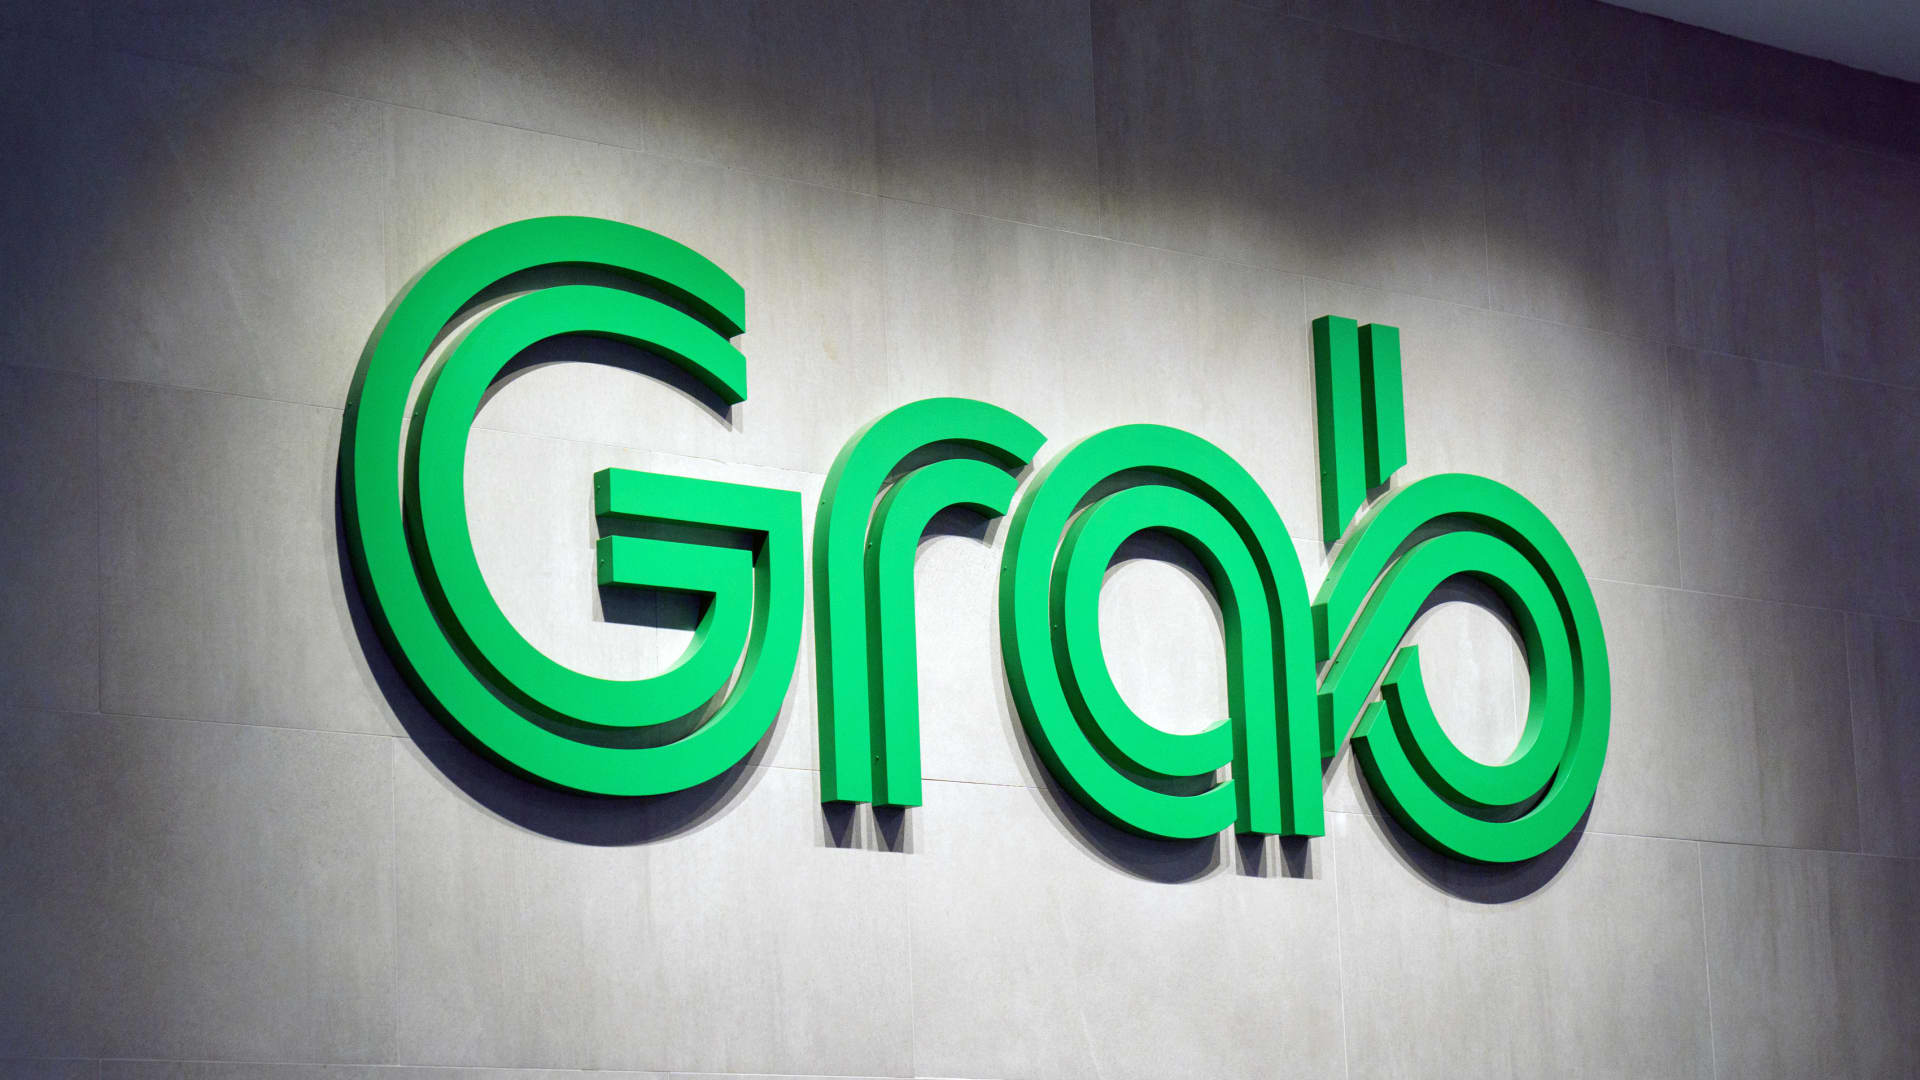 Singapore's Grab says its ride-hailing unit is on track to hit pre-Covid levels by the end of the year